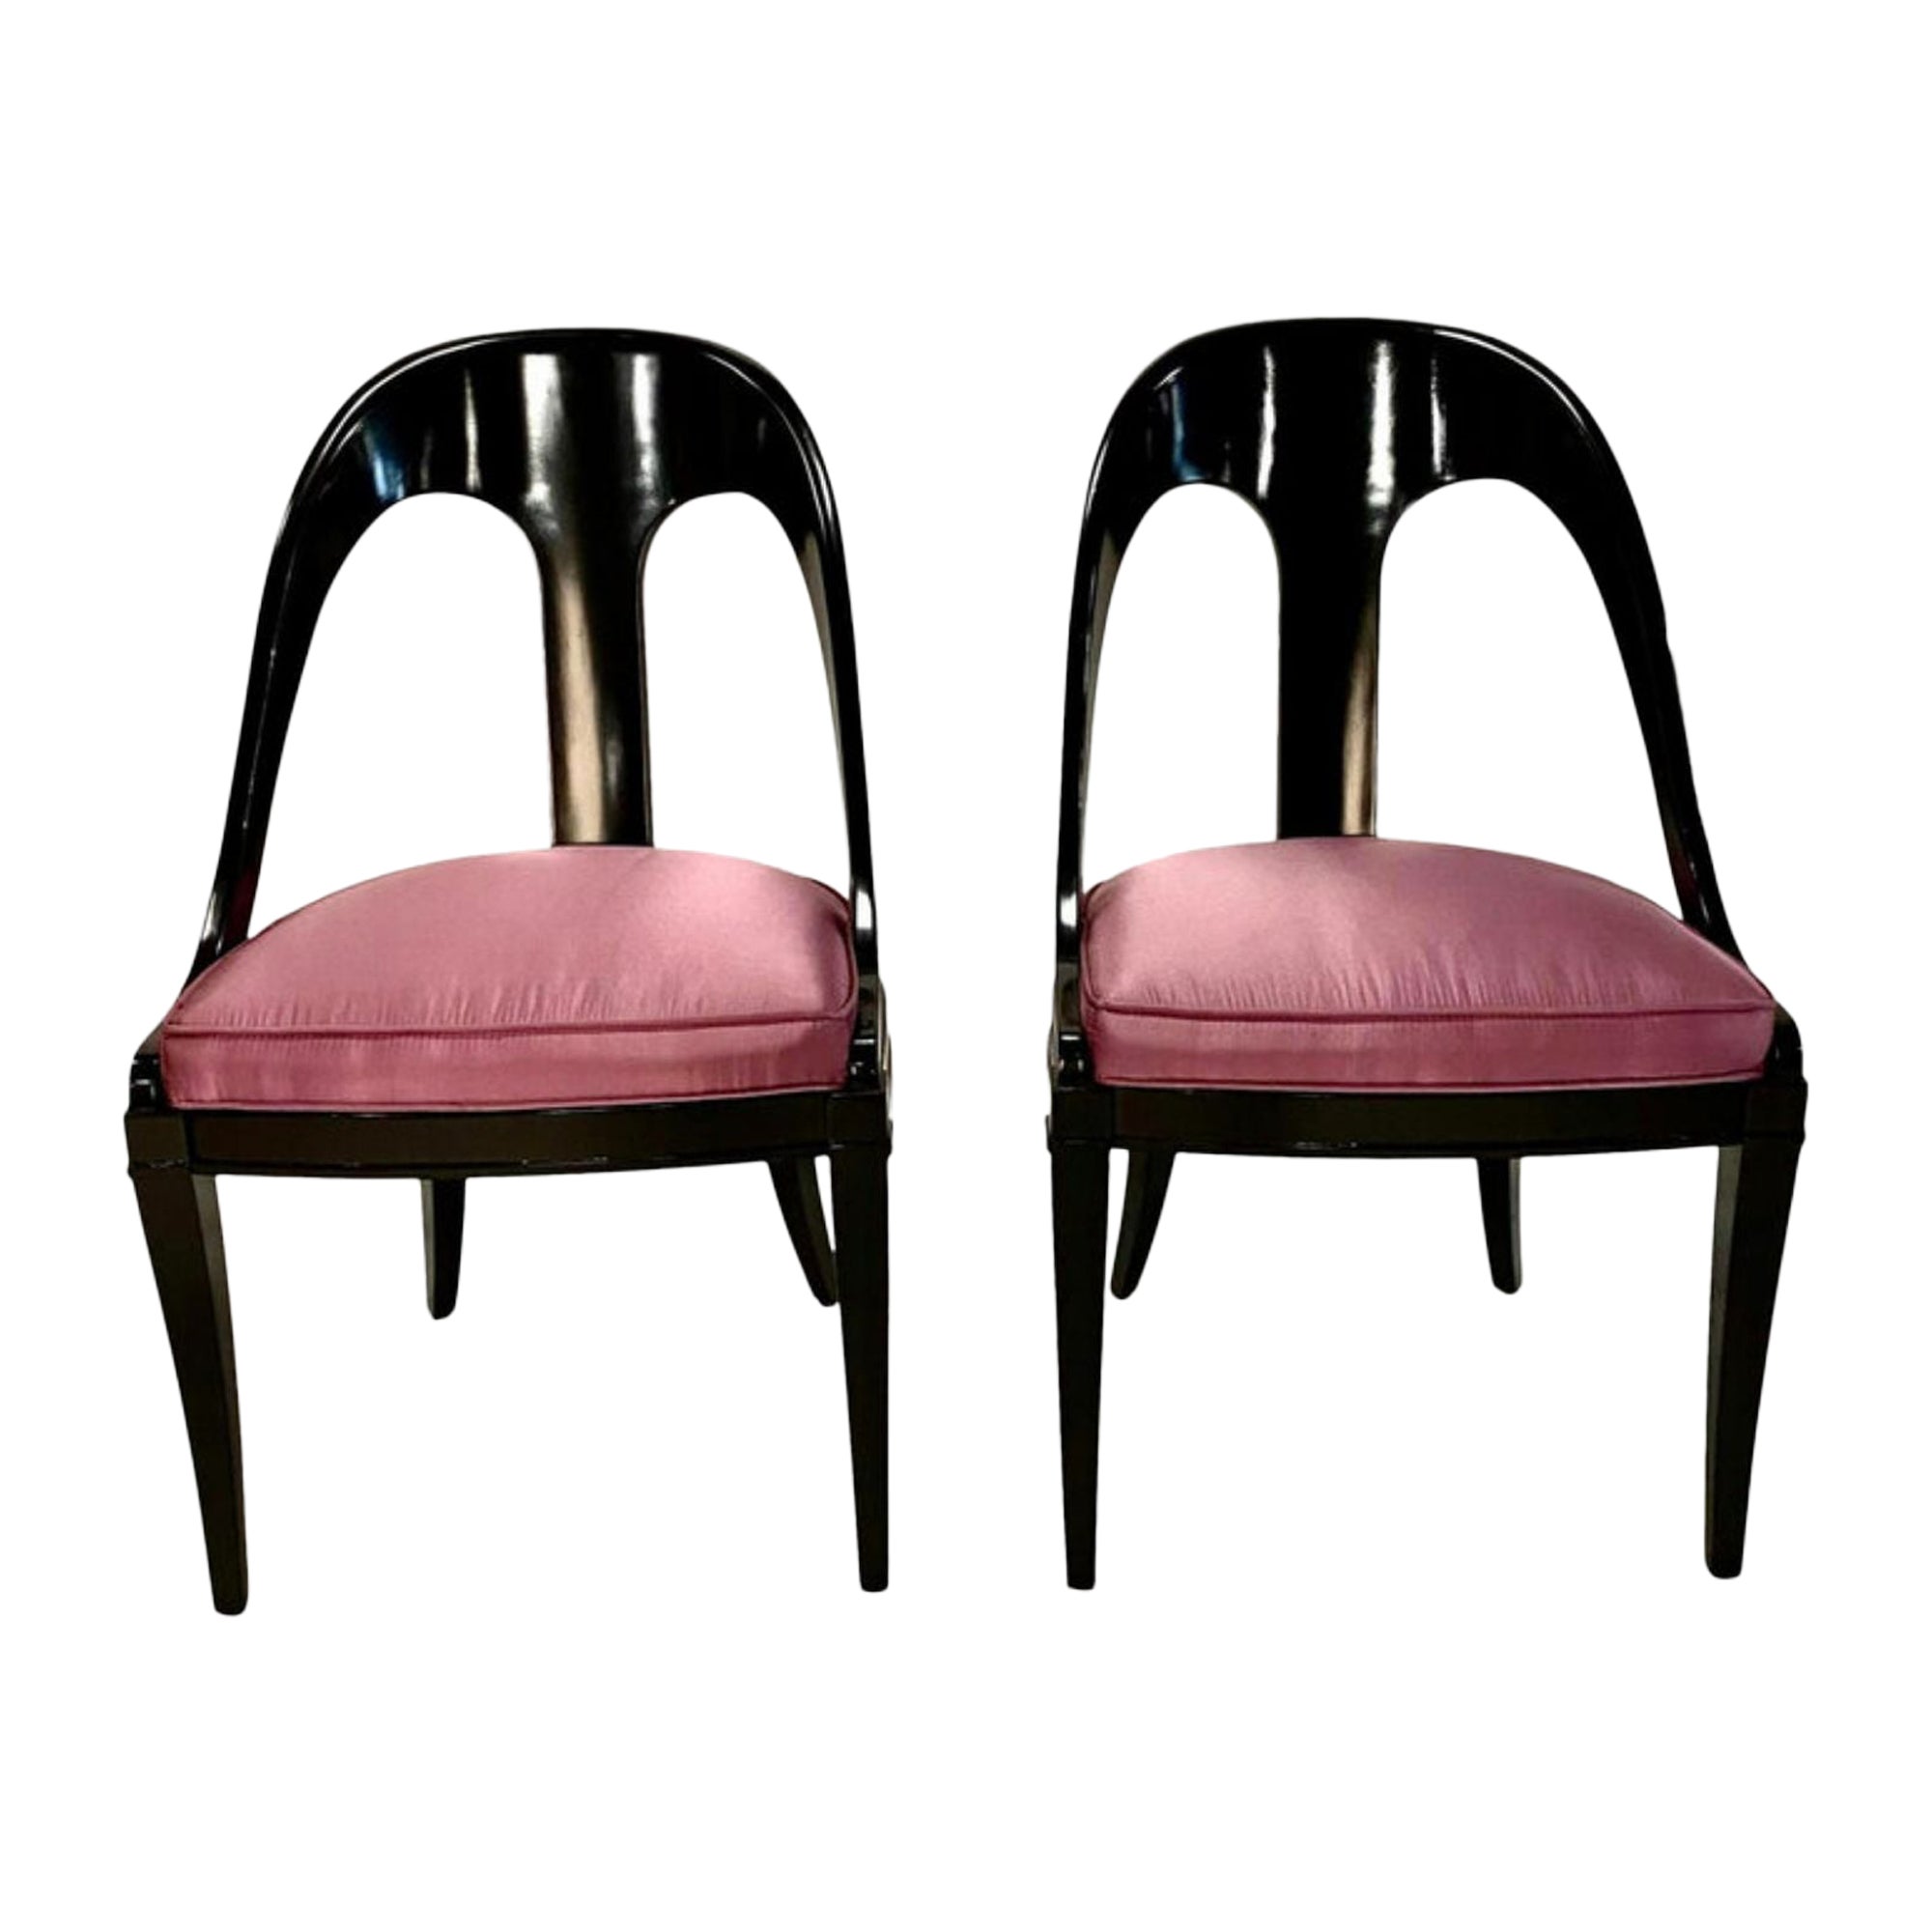 Pair of Mid-Century Neoclassic Style Spoon Chairs in Fabric and Wood Frame For Sale